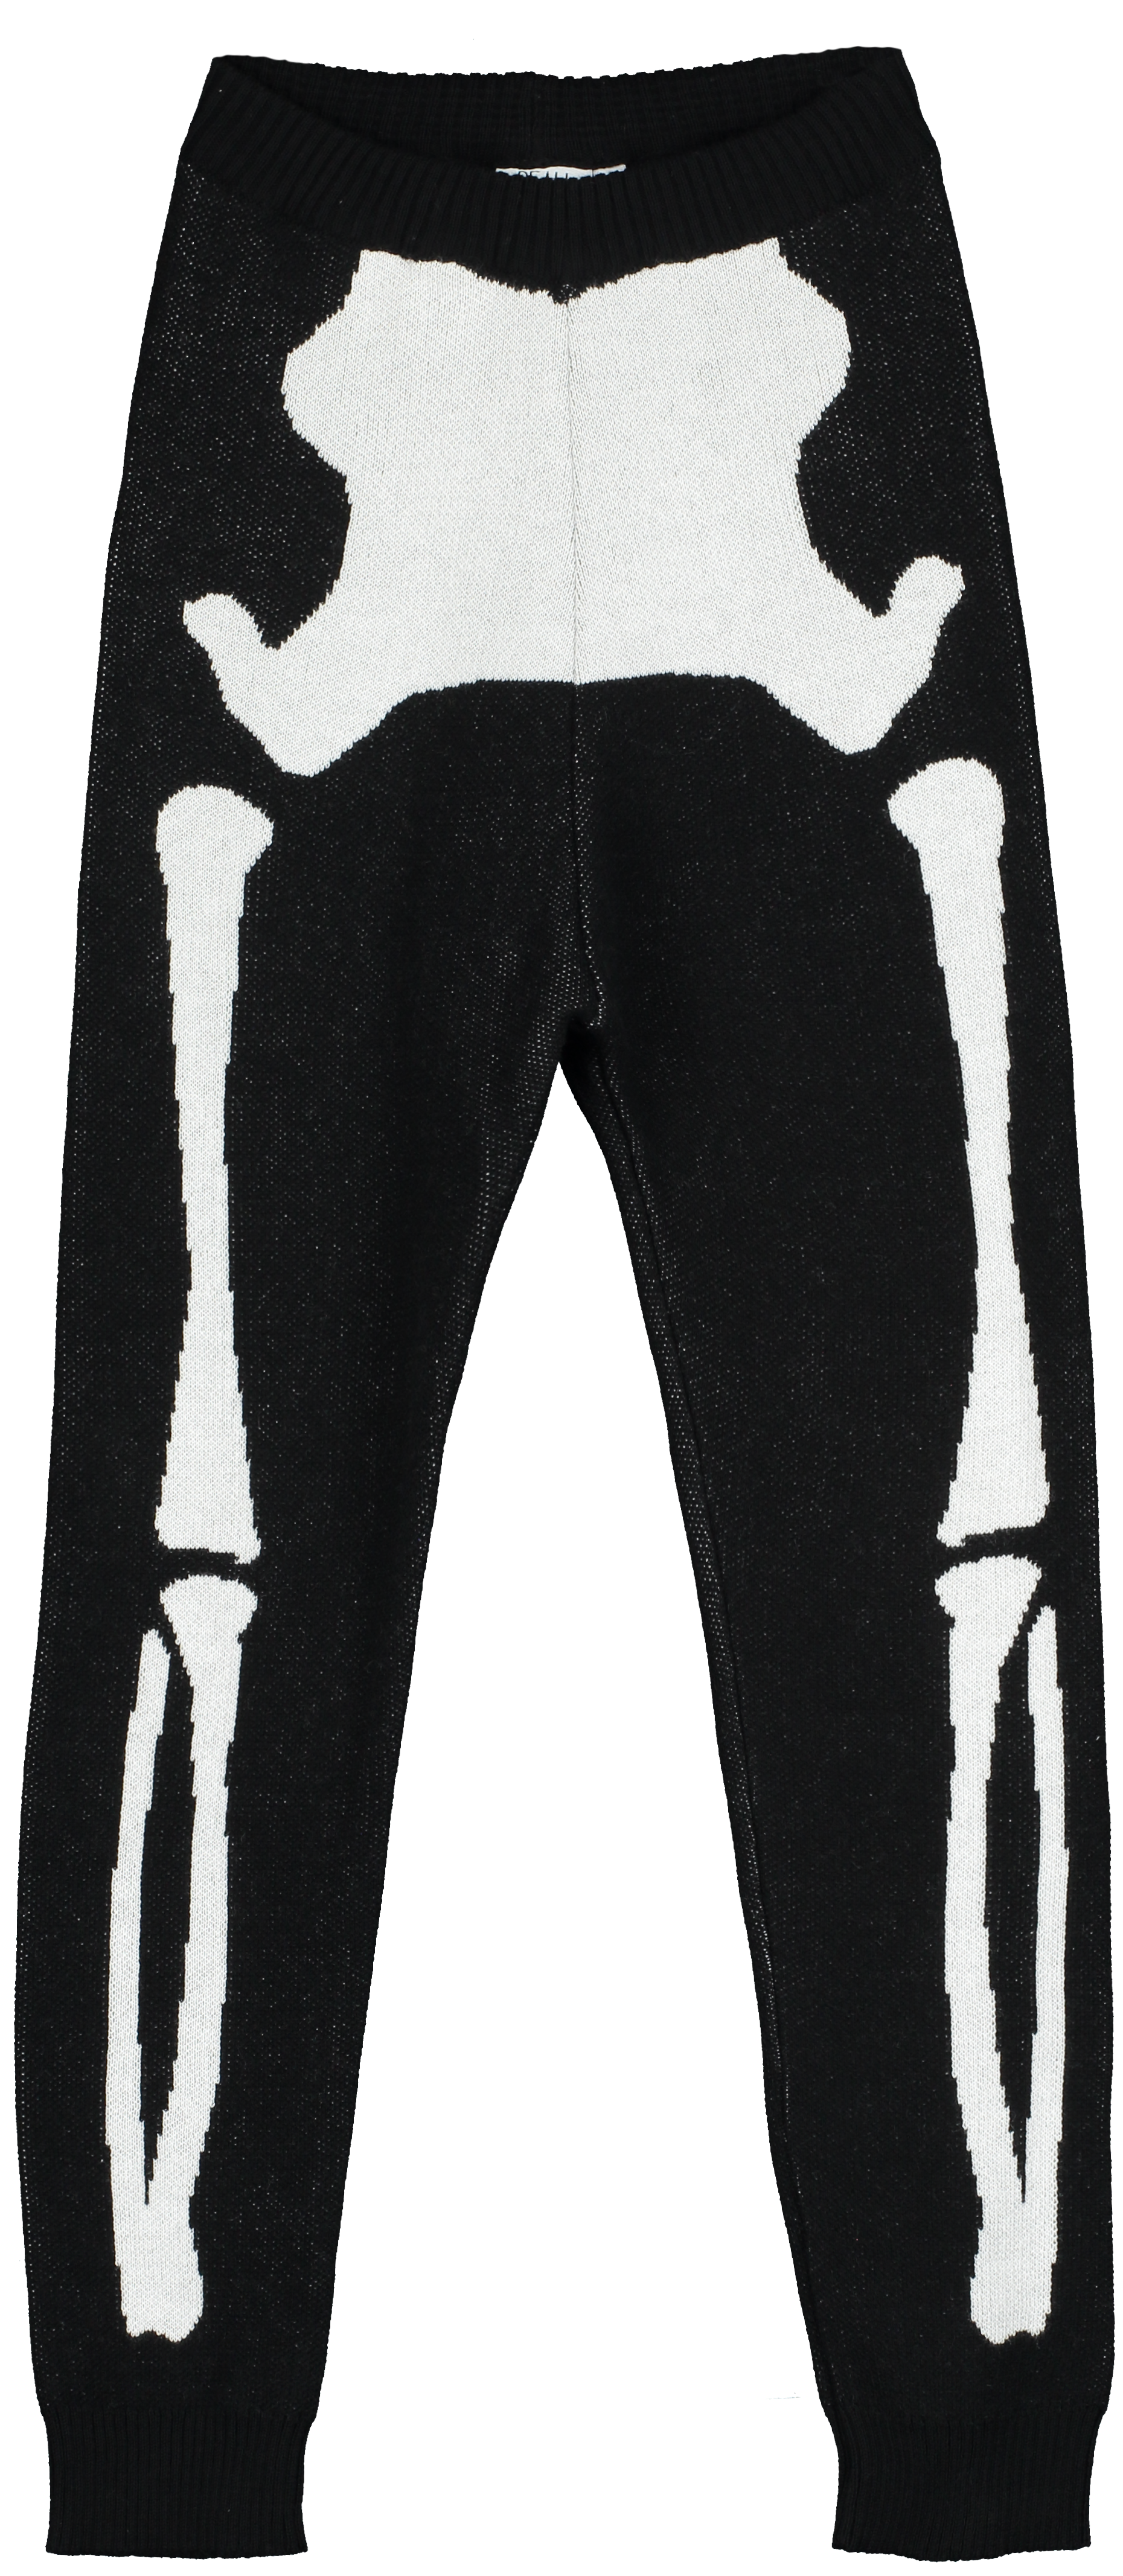                                                                                                                       Knit Tracked Suit Pants - Skeleton